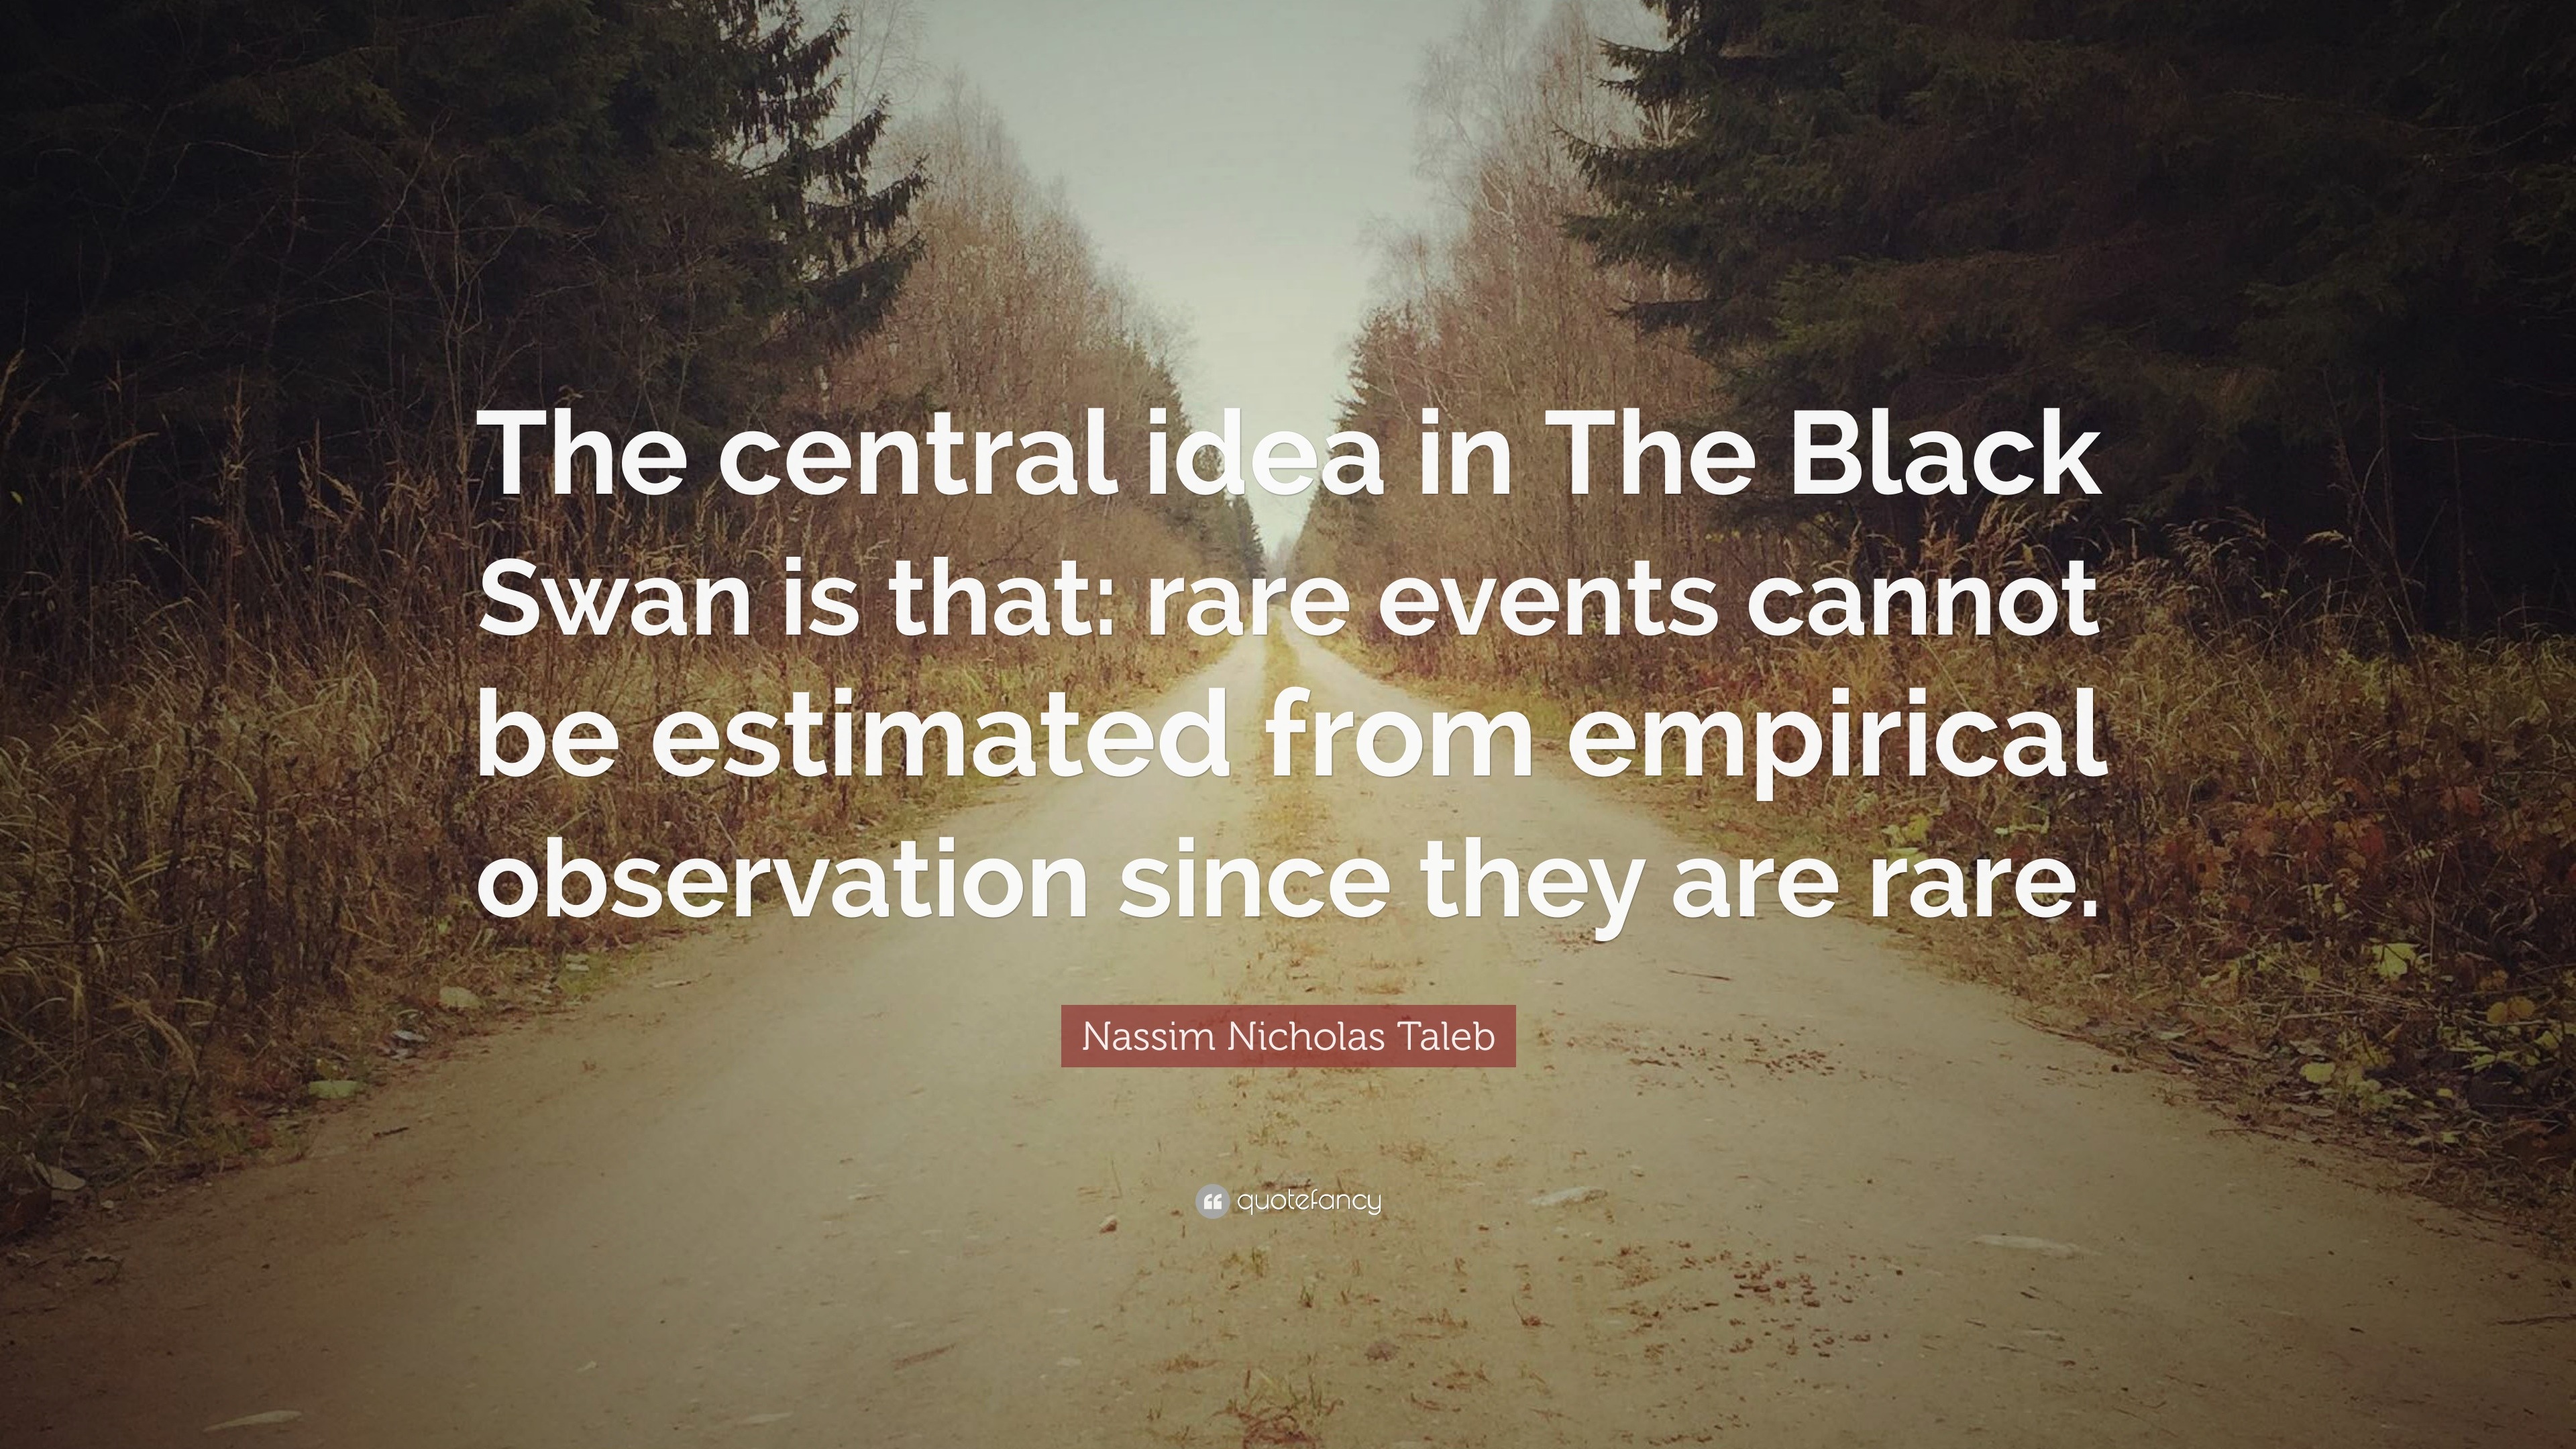 Rundt og rundt Vask vinduer Catena Nassim Nicholas Taleb Quote: “The central idea in The Black Swan is that:  rare events cannot be estimated from empirical observation since they are  ra...”